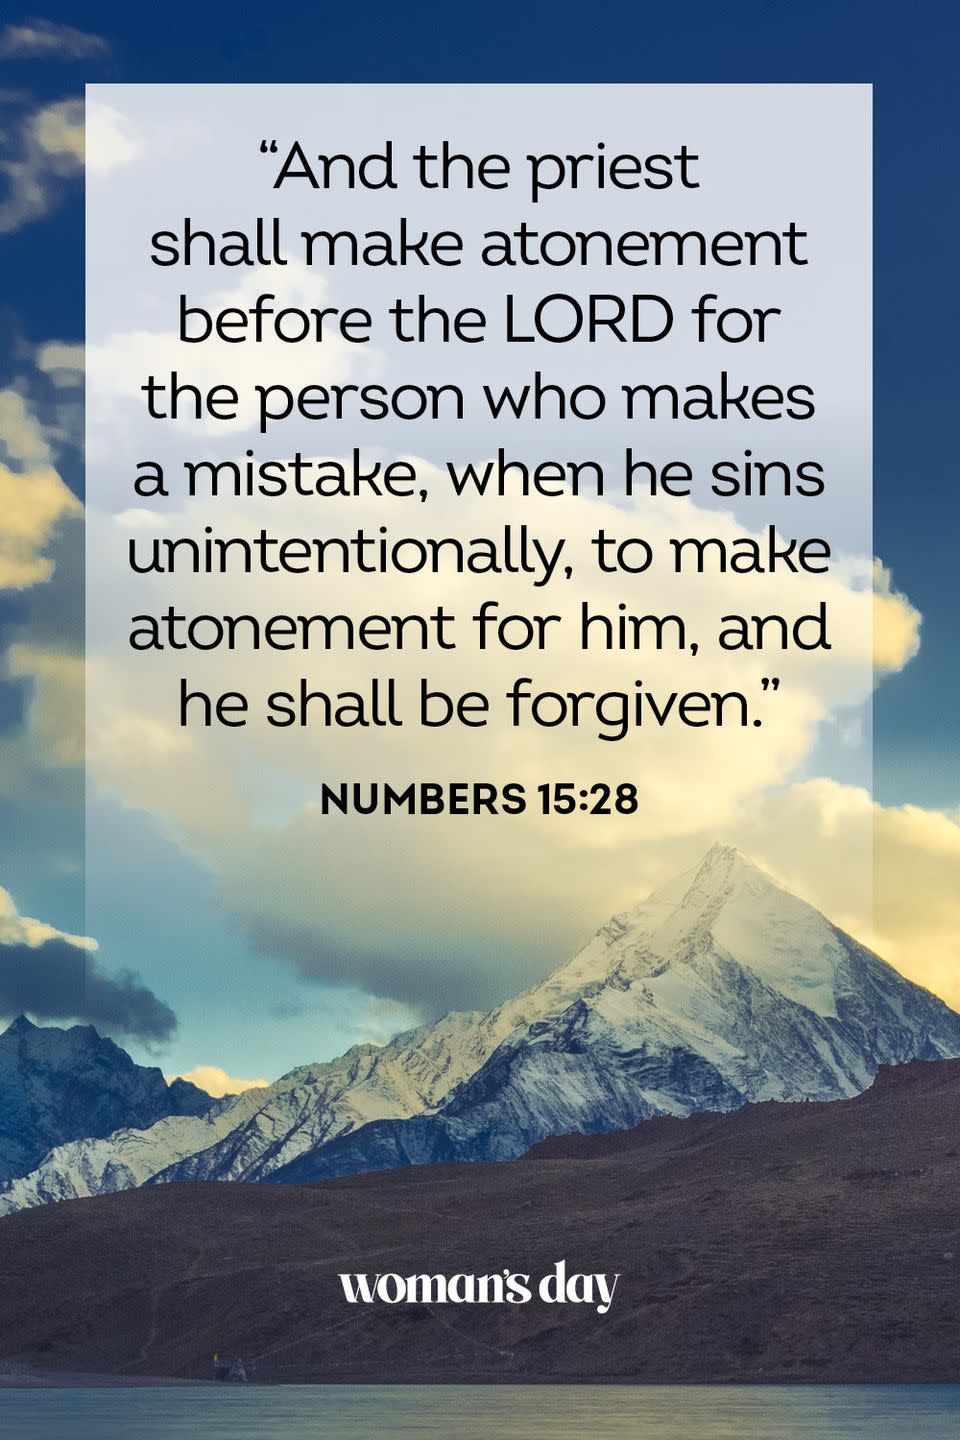 Learn to Forgive (and Maybe Forget) With These 17 Bible Verses